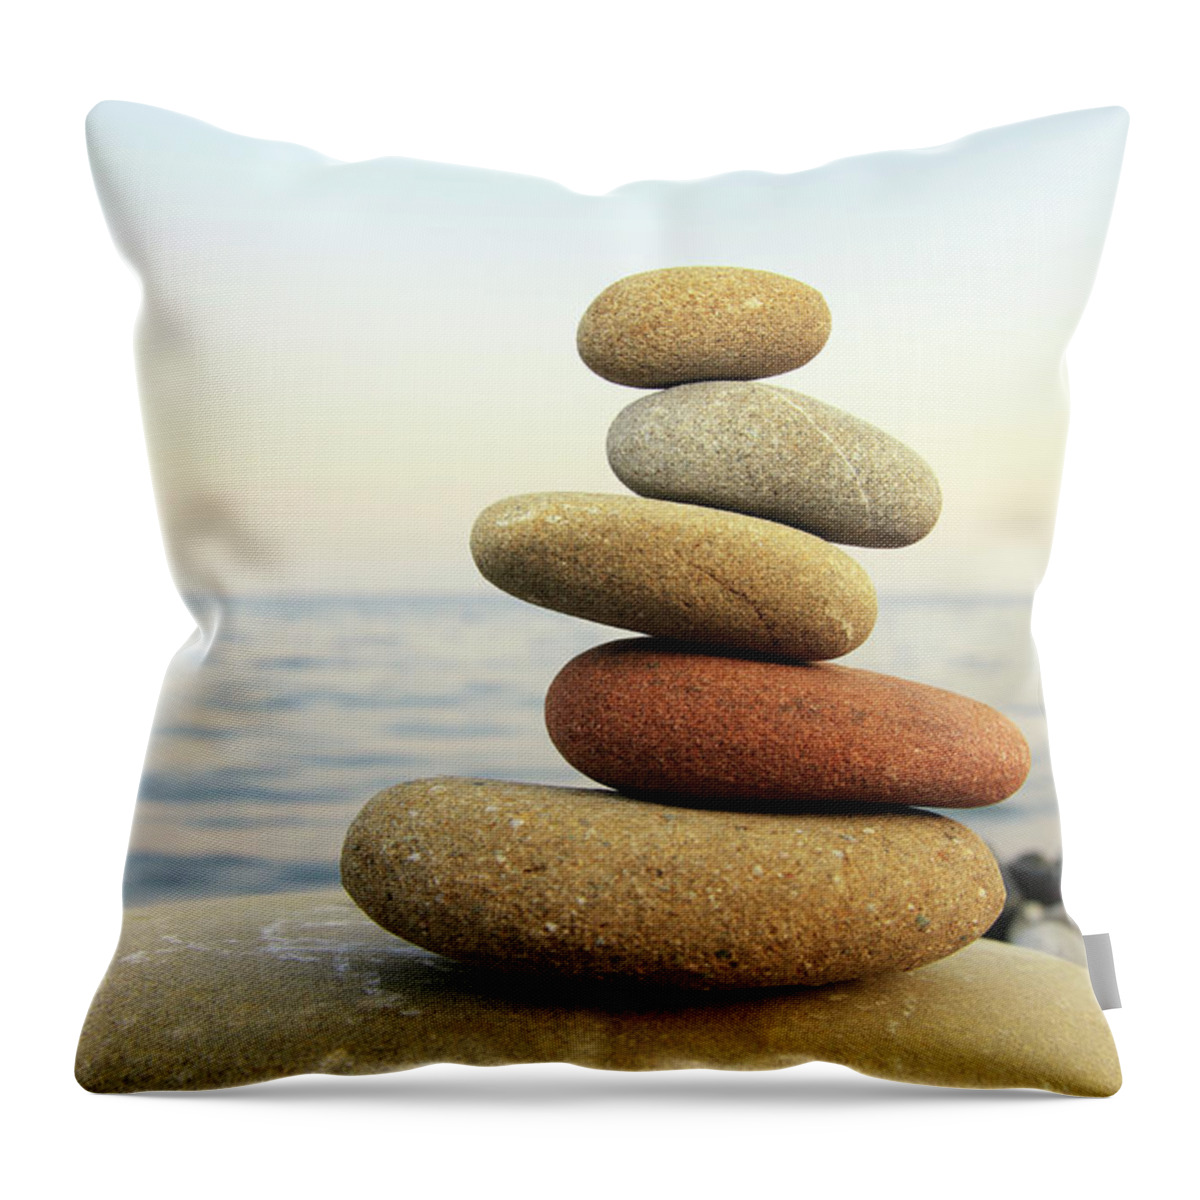 Recreational Pursuit Throw Pillow featuring the photograph Hierarchy And Balance by Petekarici